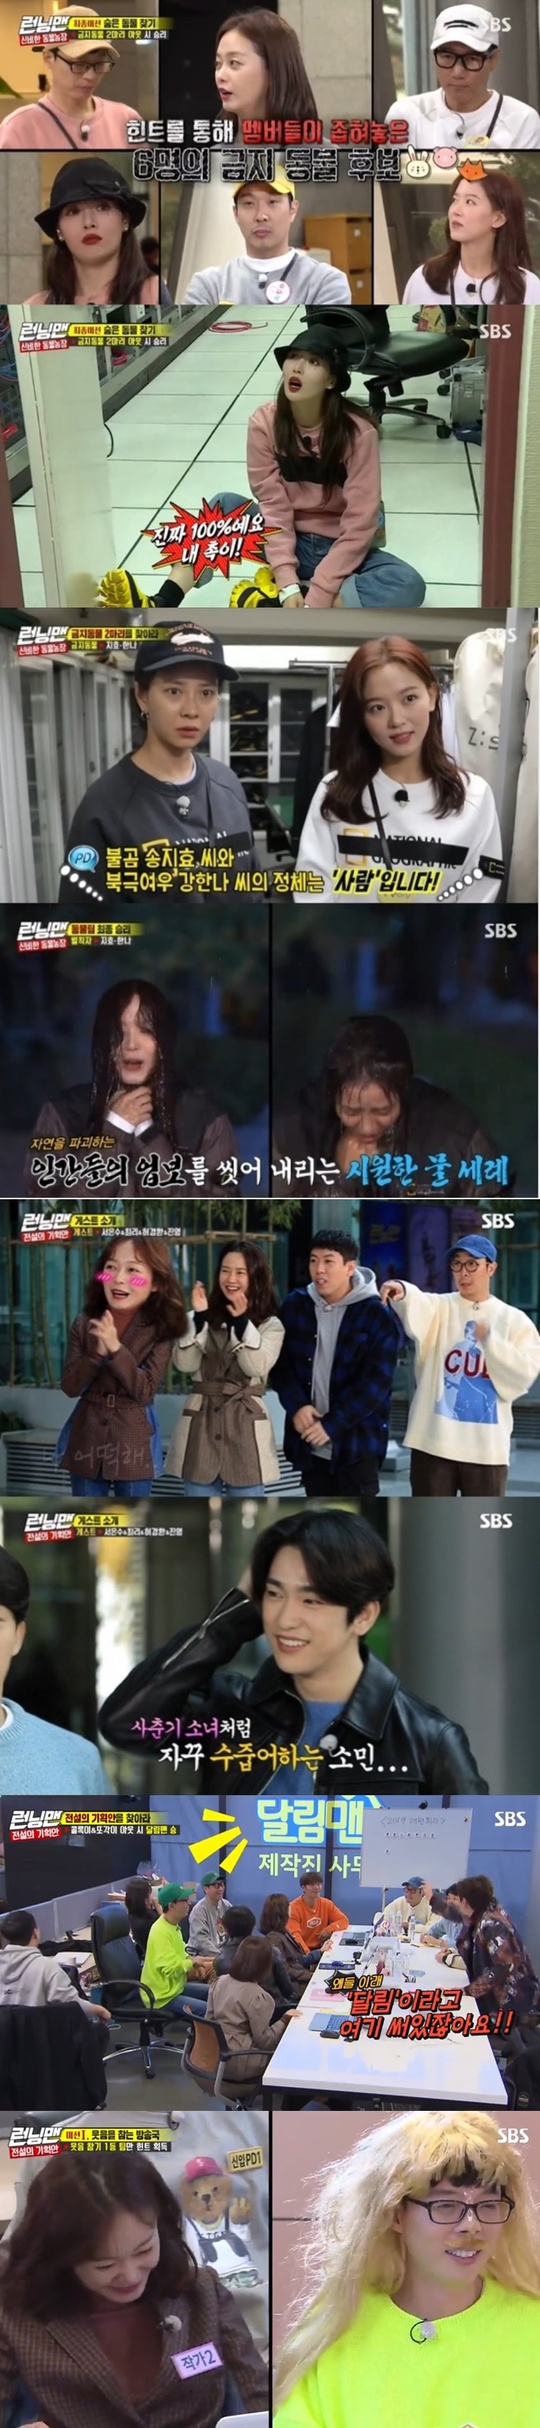 Running Man is showing a rise in TV viewer ratings for the sixth consecutive week.According to Nielsen Korea, a TV viewer rating research institute, SBS Running Man, which was broadcast on November 17, showed an increase in TV viewer ratings for the sixth consecutive week, with an average TV viewer rating of 5.4% and a second part of 8.3%.The 2049 Target TV viewer ratings, an important indicator of major advertising officials, rose by 1% from last week to 4.8% (based on the second part of the Seoul metropolitan areas TV viewer ratings).The highest TV viewer ratings per minute took as much as 10 percent.The broadcast was decorated with the final race of Mysterious Animal Farm and began to search for banned animals.If you find a forbidden animal and in-N-Out Burger, the general animal wins, but the forbidden animal was able to use the At Close Range.When an In-N-Out Burgered animal is created by a prohibited animal, the At Close Range is created, and all hints in the At Close Range disappear, and the In-N-Out Burger is also made even if the animal is inside it.Yoo Jae-Suks performance shone in the face of everyone questioning each other.Yoo Jae-Suk found out that the forbidden animals were people, and he noticed that Kang Han-Na and Song Ji-hyo were sisters and bears who became foxes respectively.In the meantime, Kang Han-Na and Song Ji-hyo respectively targeted Hyun-ah and Everglow Shihyeon in-N-Out Burger and Yoo Jae-Suk.Yoo Jae-Suk informed members of the identity of the banned animals in an urgent situation and eventually the banned animals Kang Han-Na and Song Ji-hyo were in-N-Out Burger and received the final penalty.On the other hand, on the same day, the Legendary Plan Race, which was guested by God Seven Jinyoung, actor Seo Eun-soo, Choi Ri and comedian Hur Kyung-hwan, was also released.Jeon So-min welcomed Jinyoung by revealing his excitement, but he gave a big smile with unexpected sweat.Since then, members have been divided into PD, writers, and new PD teams of the Ralim Man program and have begun to search for Kolok Lee and the other, which is reported as a ghost story of the broadcaster.The first mission was to find a laugh. You have to put up with laughter under any circumstances, and if you laugh, you have to carry out a dressing penalty.In the midst of a fierce laughter confrontation, a questionable tool uncle appeared in front of the members.Everyone was nervous about the powerful laugh alarm and this scene was the best one minute with 10% of the best TV viewer ratings per minute.Park Su-in